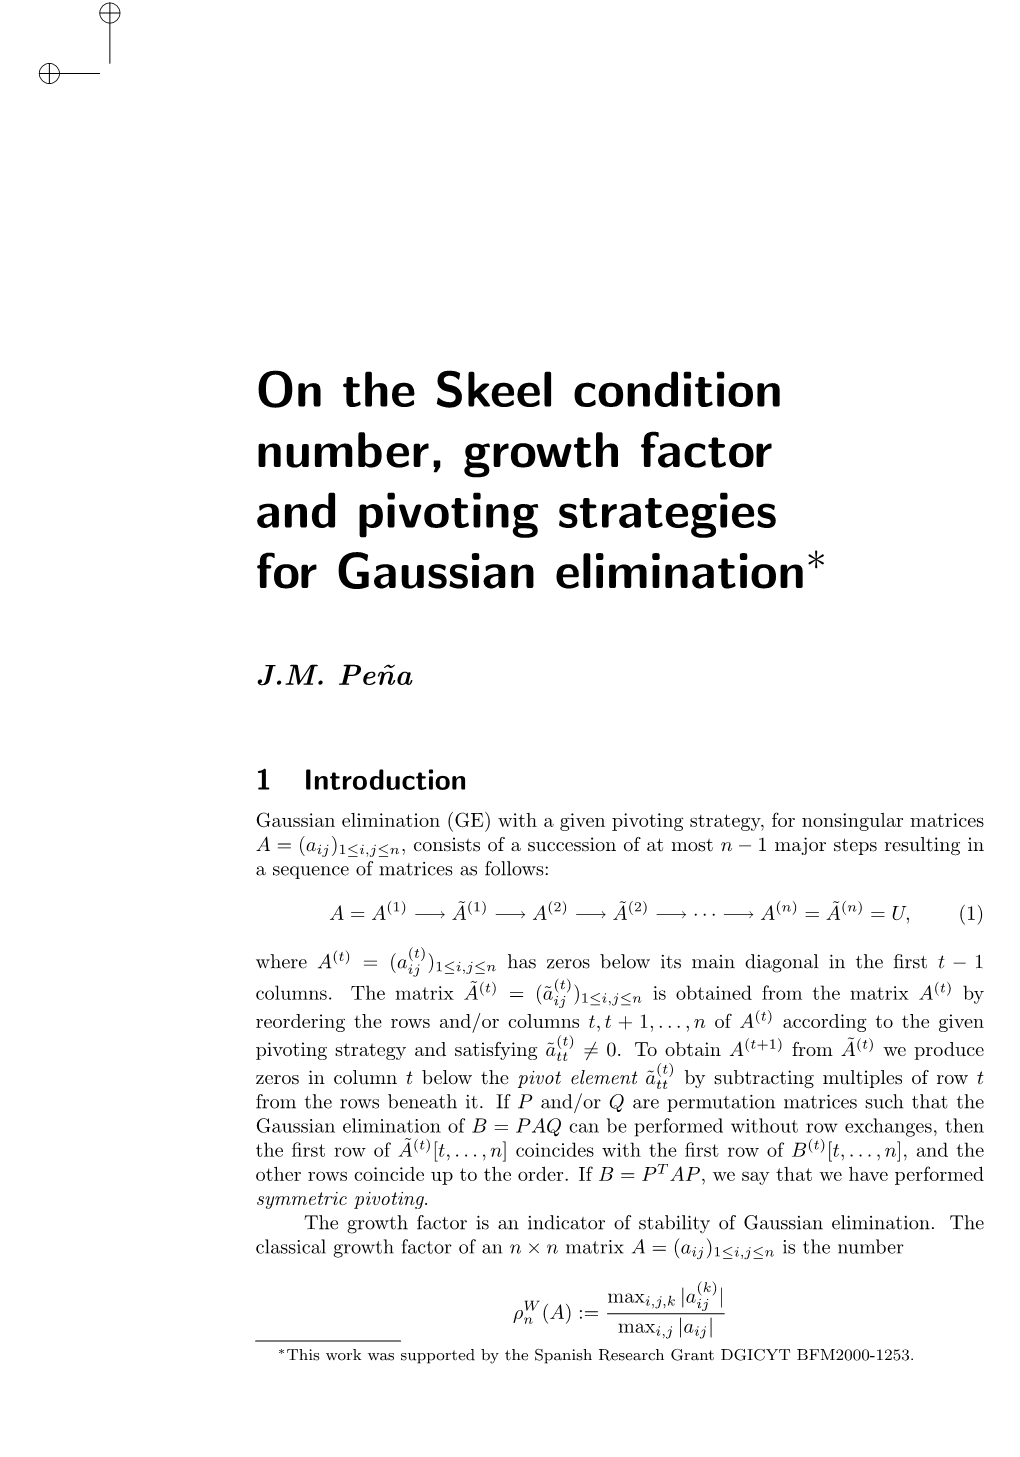 On the Skeel Condition Number, Growth Factor and Pivoting Strategies for Gaussian Elimination∗